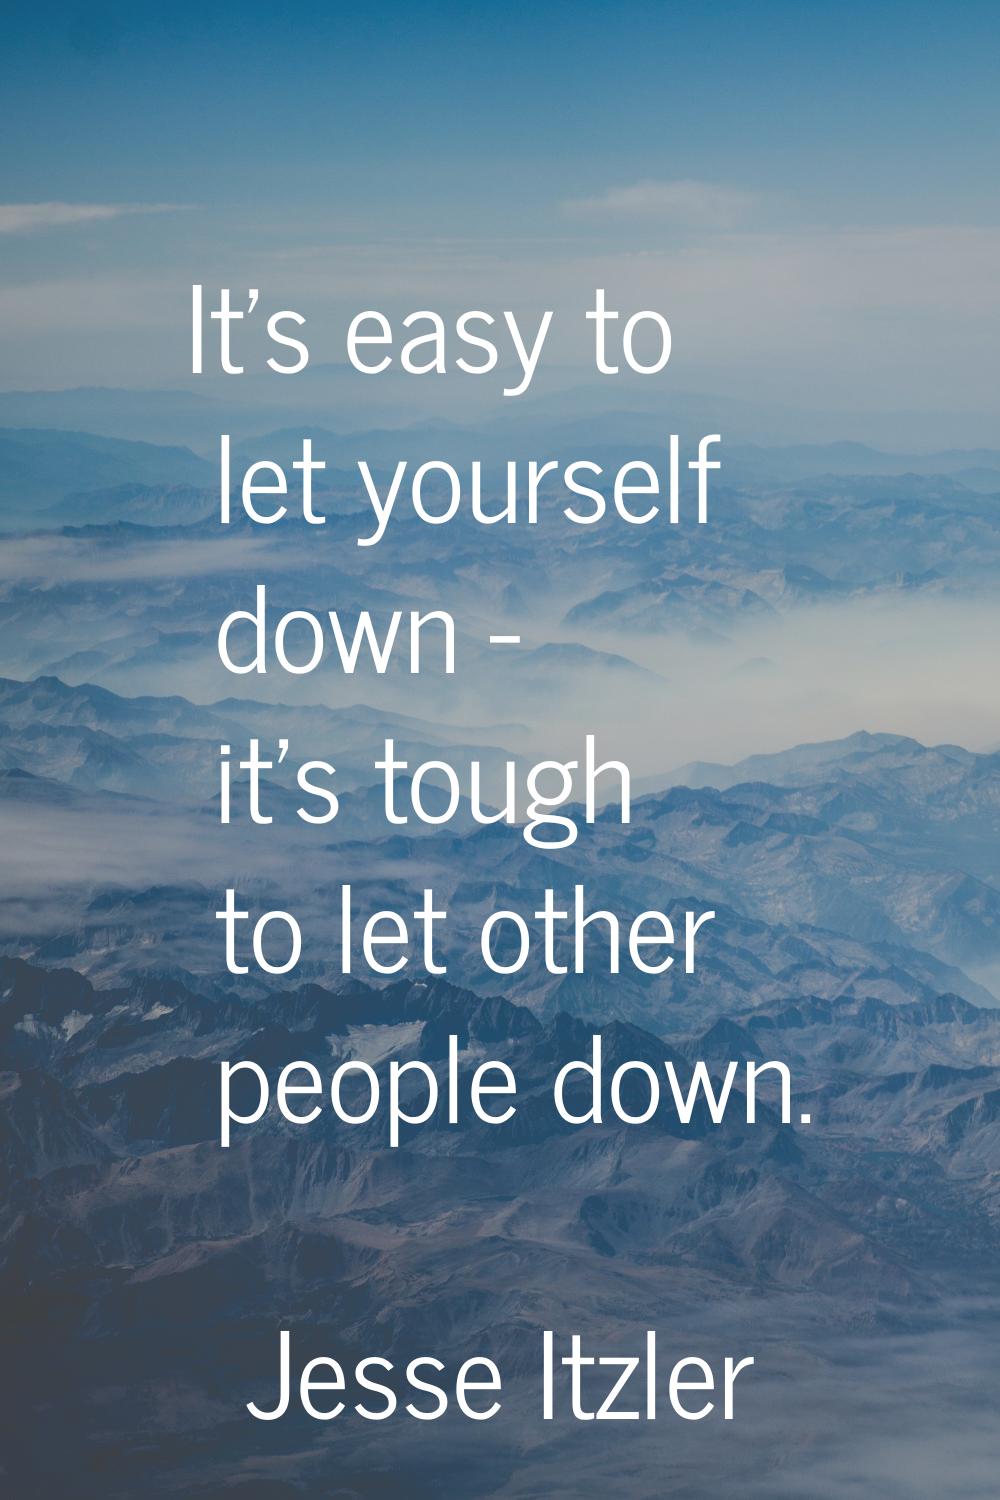 It's easy to let yourself down - it's tough to let other people down.